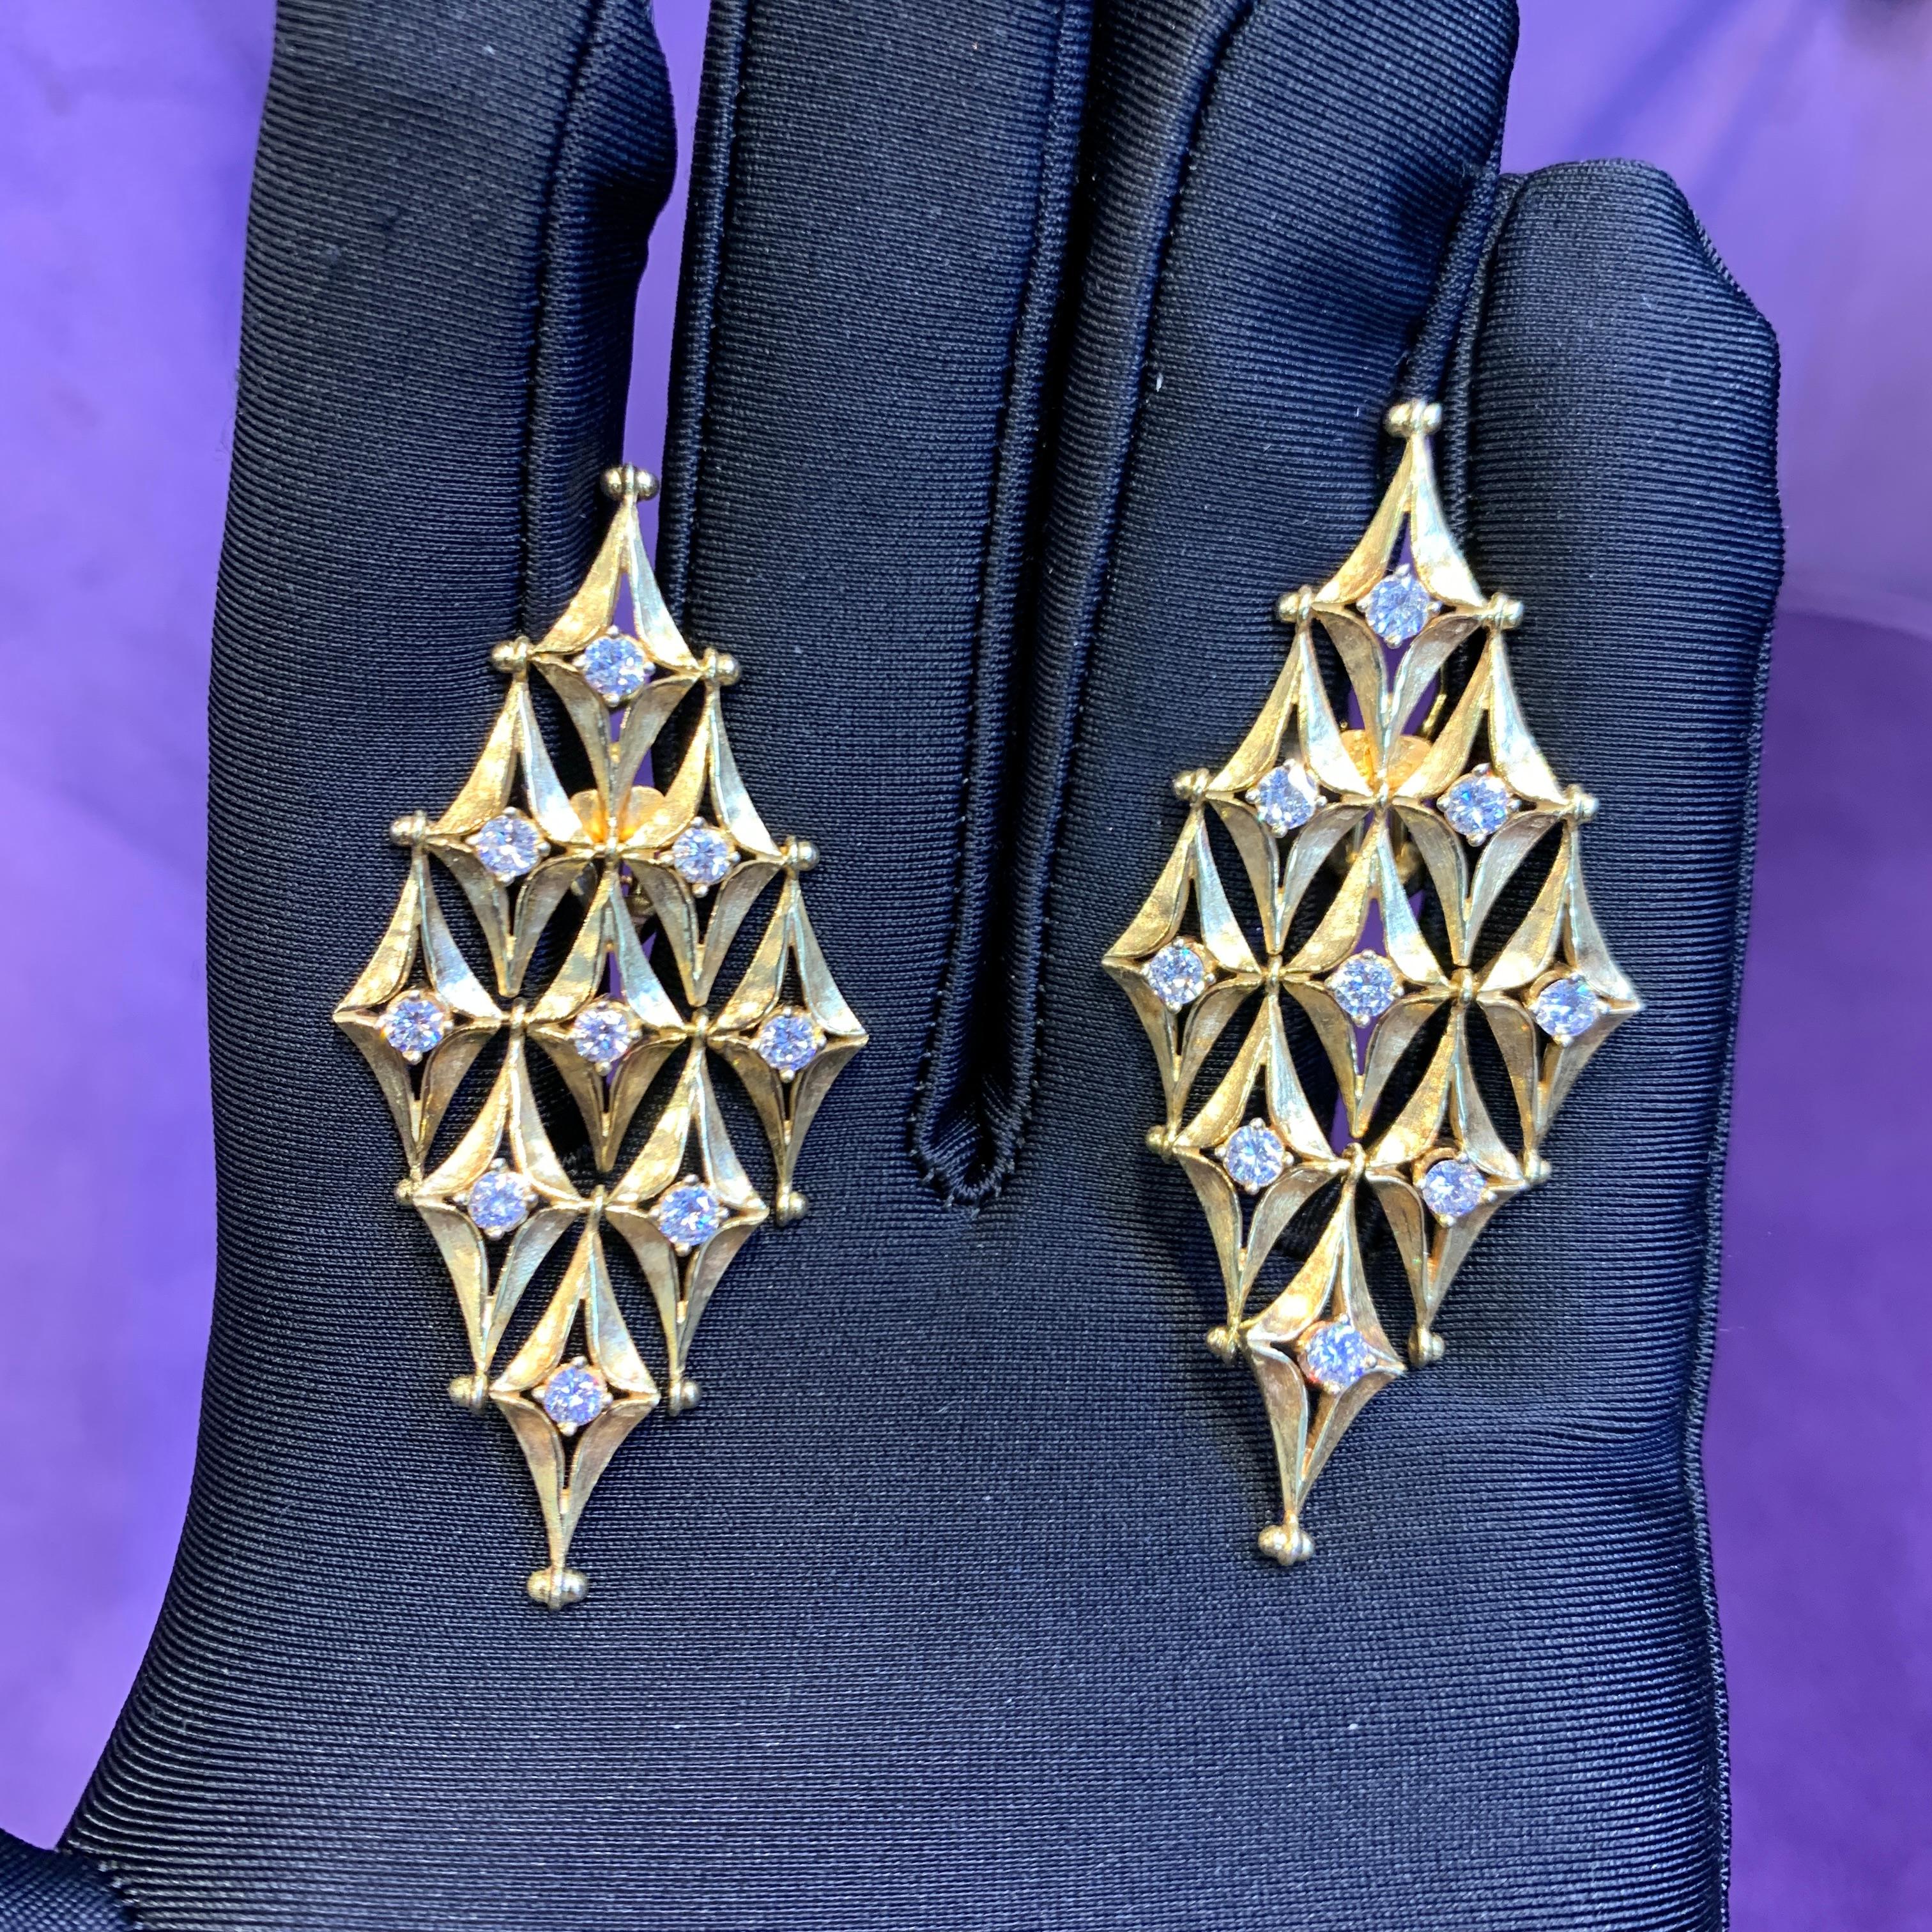 Diamond Shaped Diamond Earrings In Excellent Condition For Sale In New York, NY